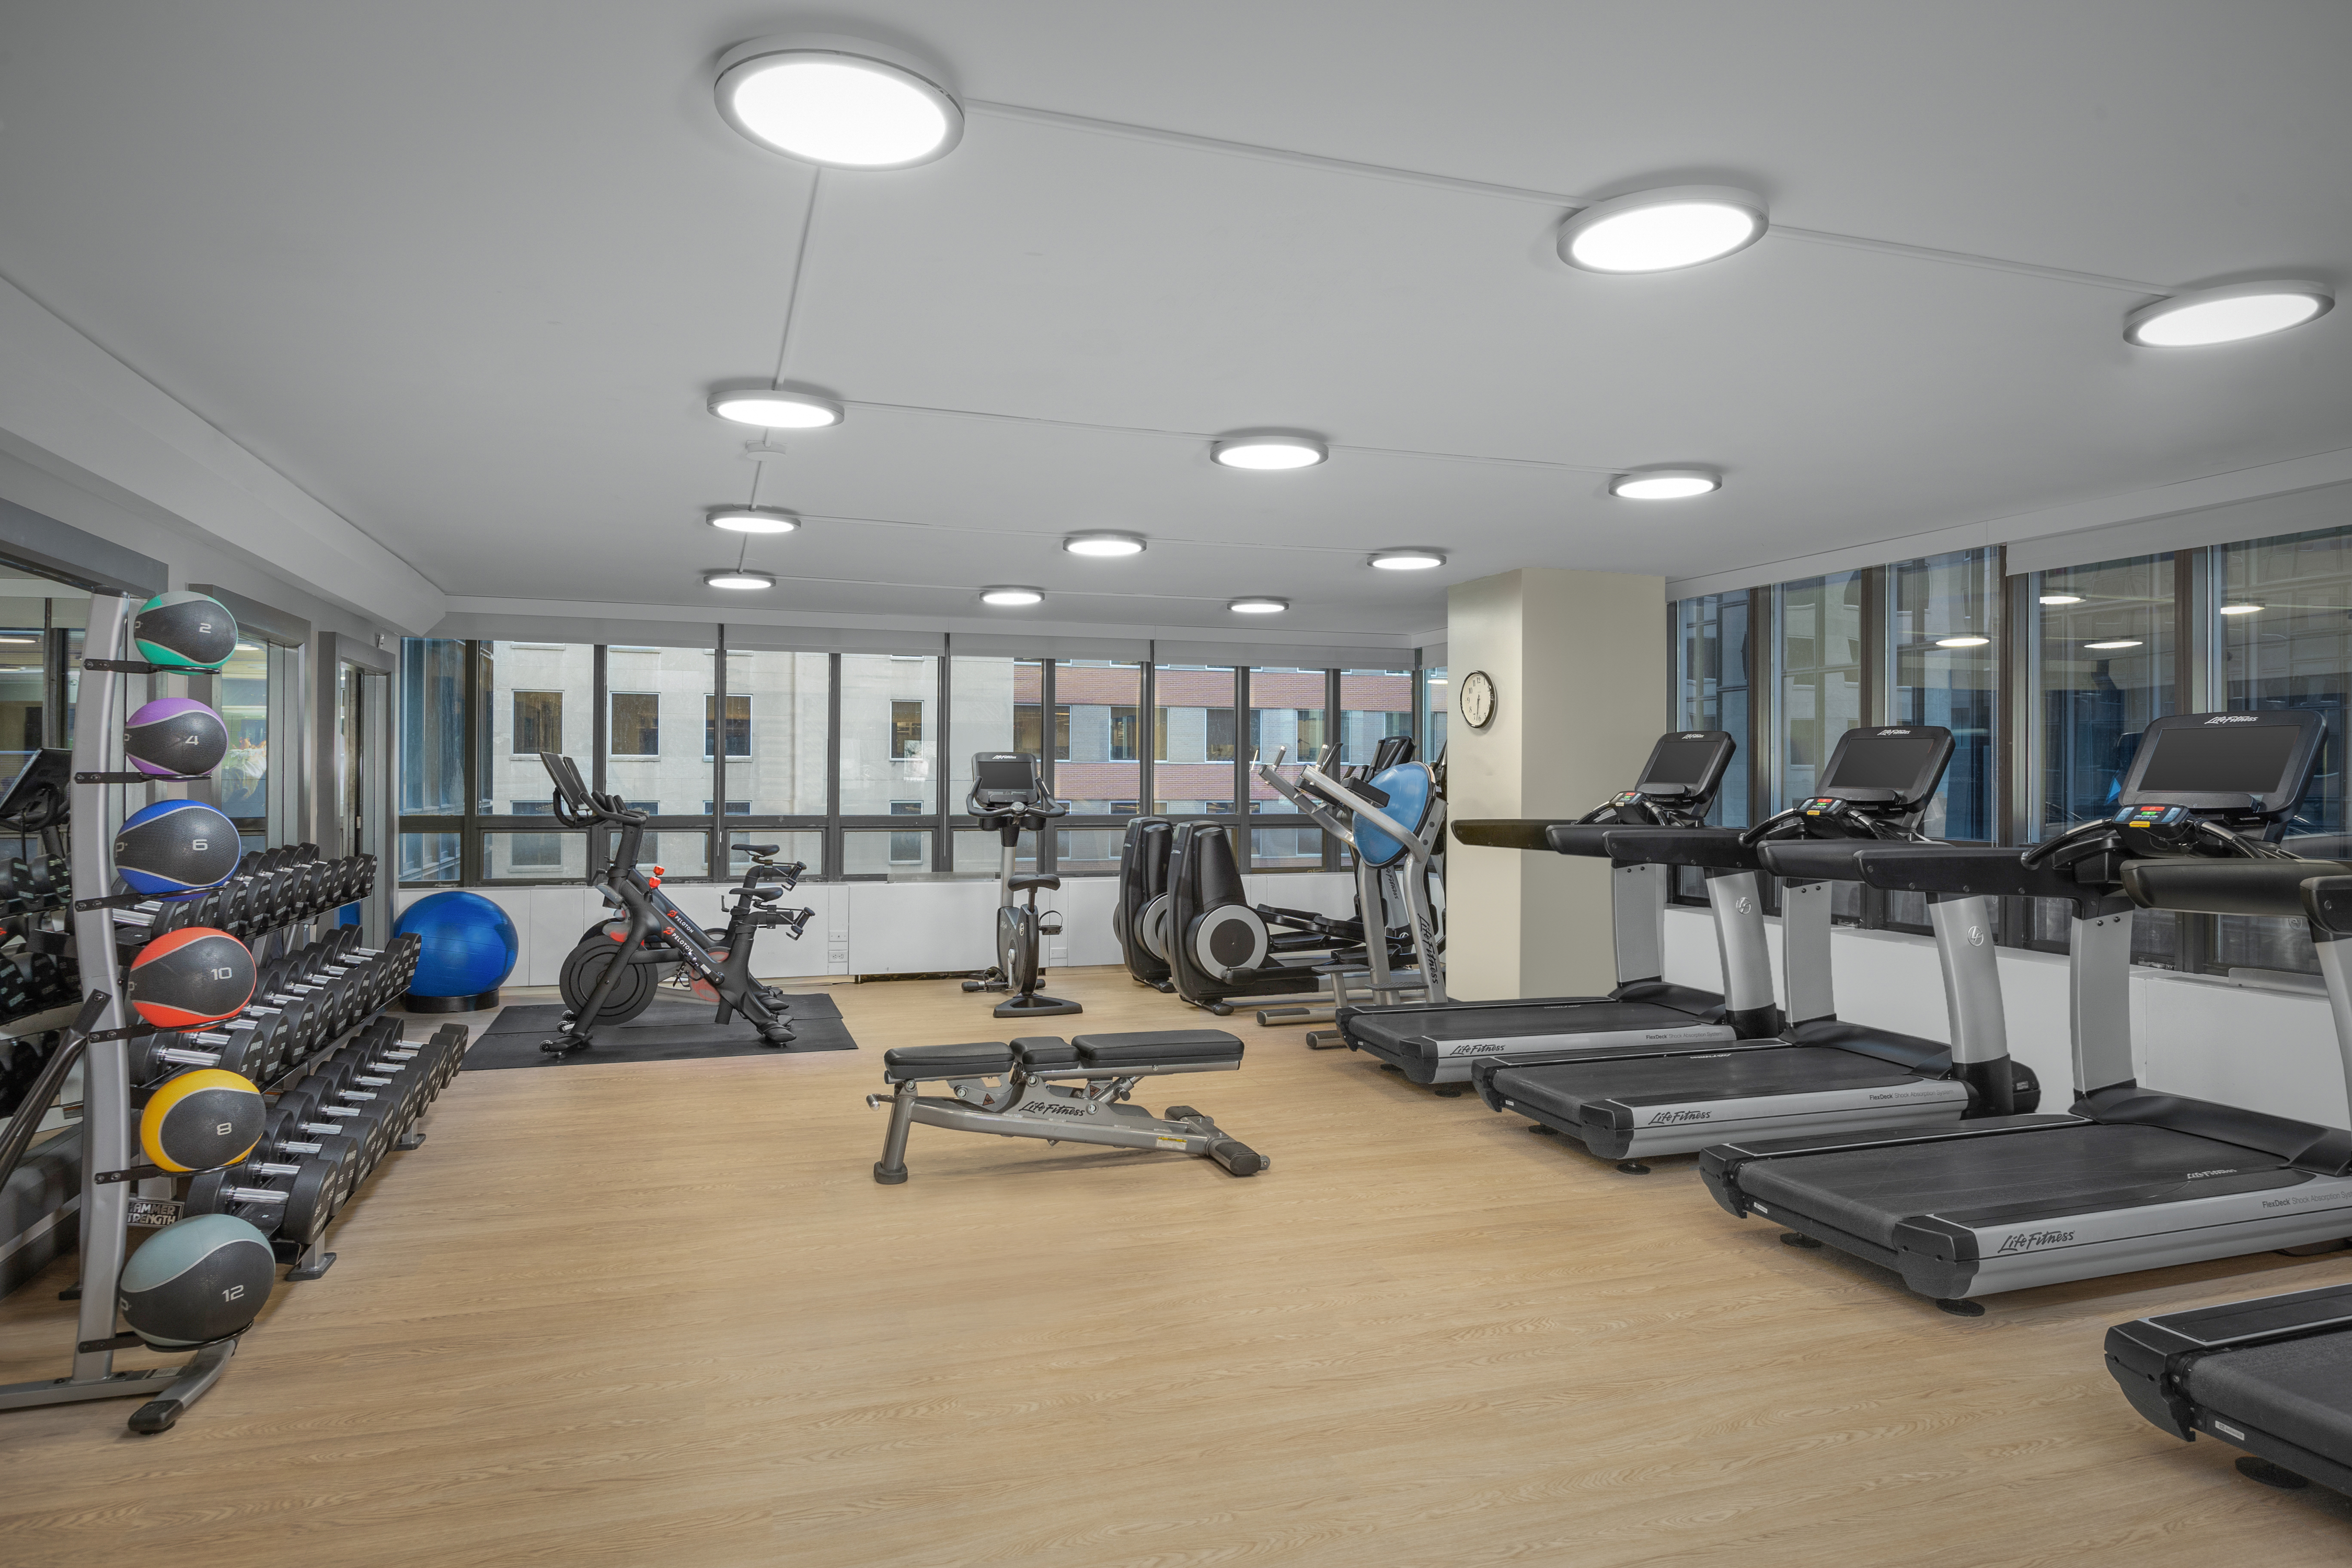 Fitness Room with Treadmills, Exercise Balls and Weights